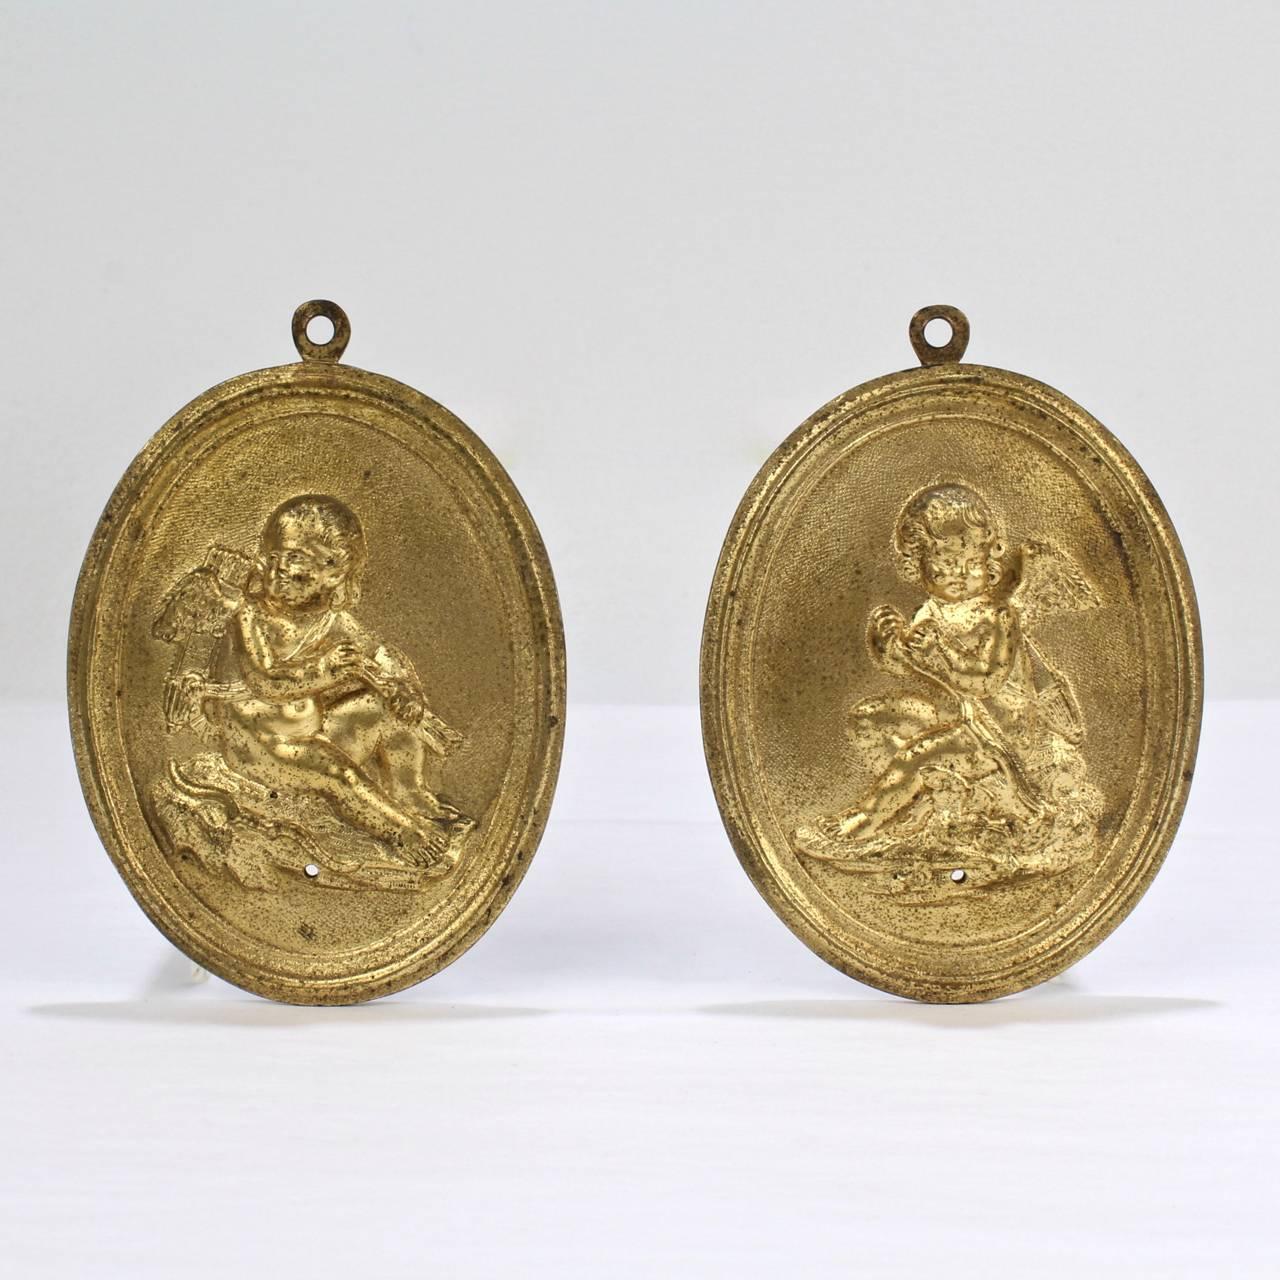 A fine pair of antique French bronze plaques depicting Cupid with his bow and arrows.

Of oval form with figural reliefs and a doré gilt bronze finish. The top with a small, cast attached bail for mounting.

Height: ca. 4 1/2 in.

Provenance: